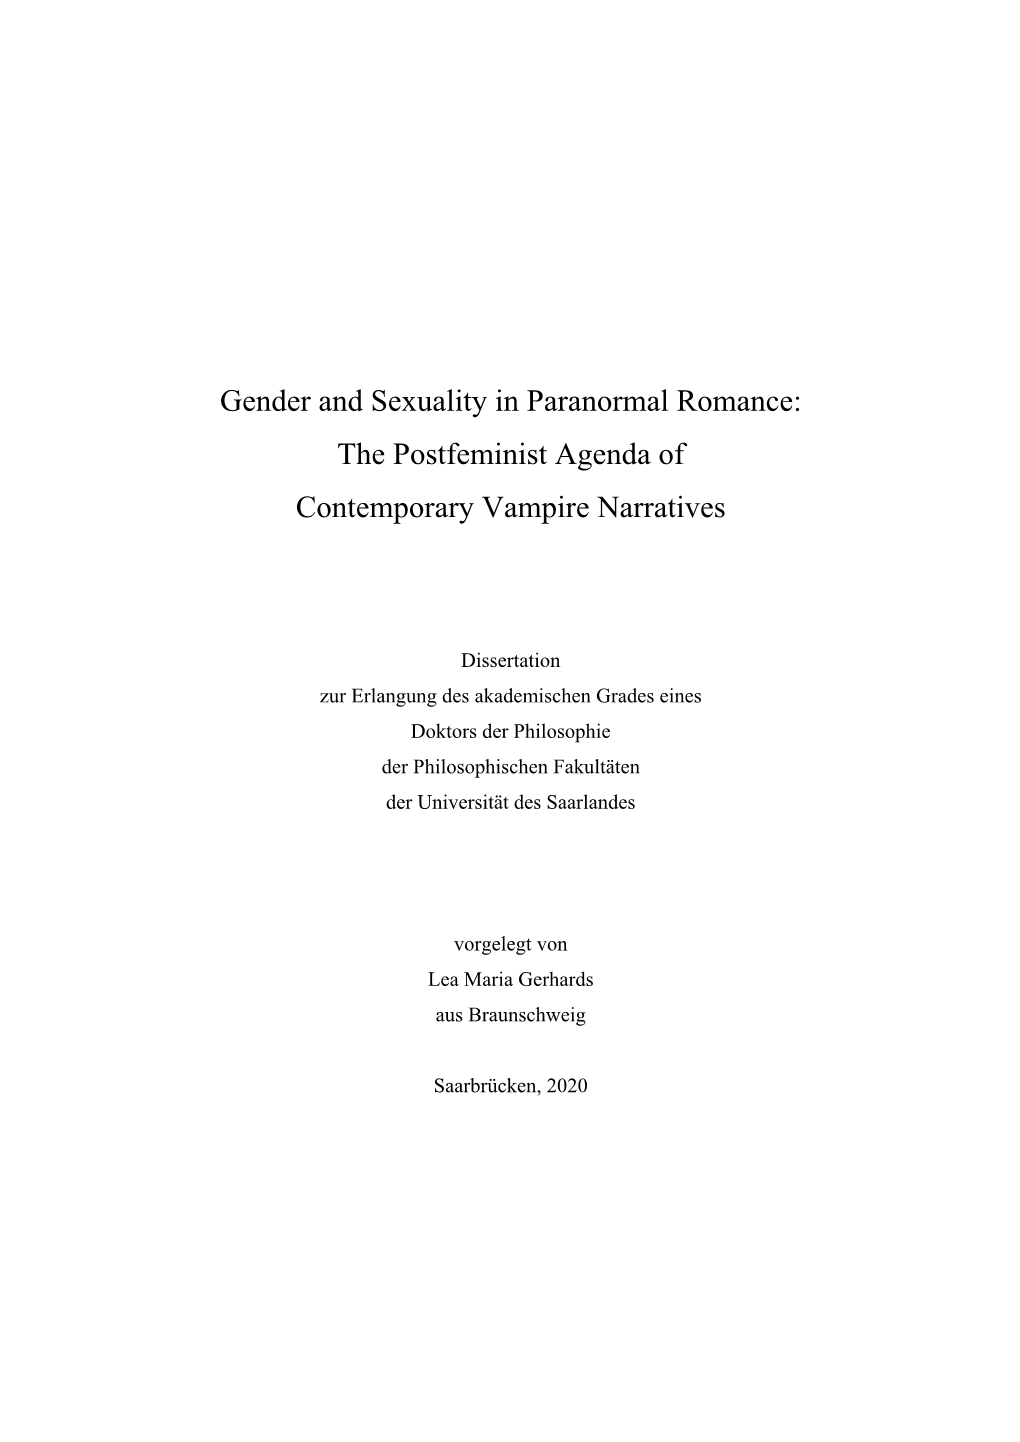 Gender and Sexuality in Paranormal Romance: the Postfeminist Agenda of Contemporary Vampire Narratives